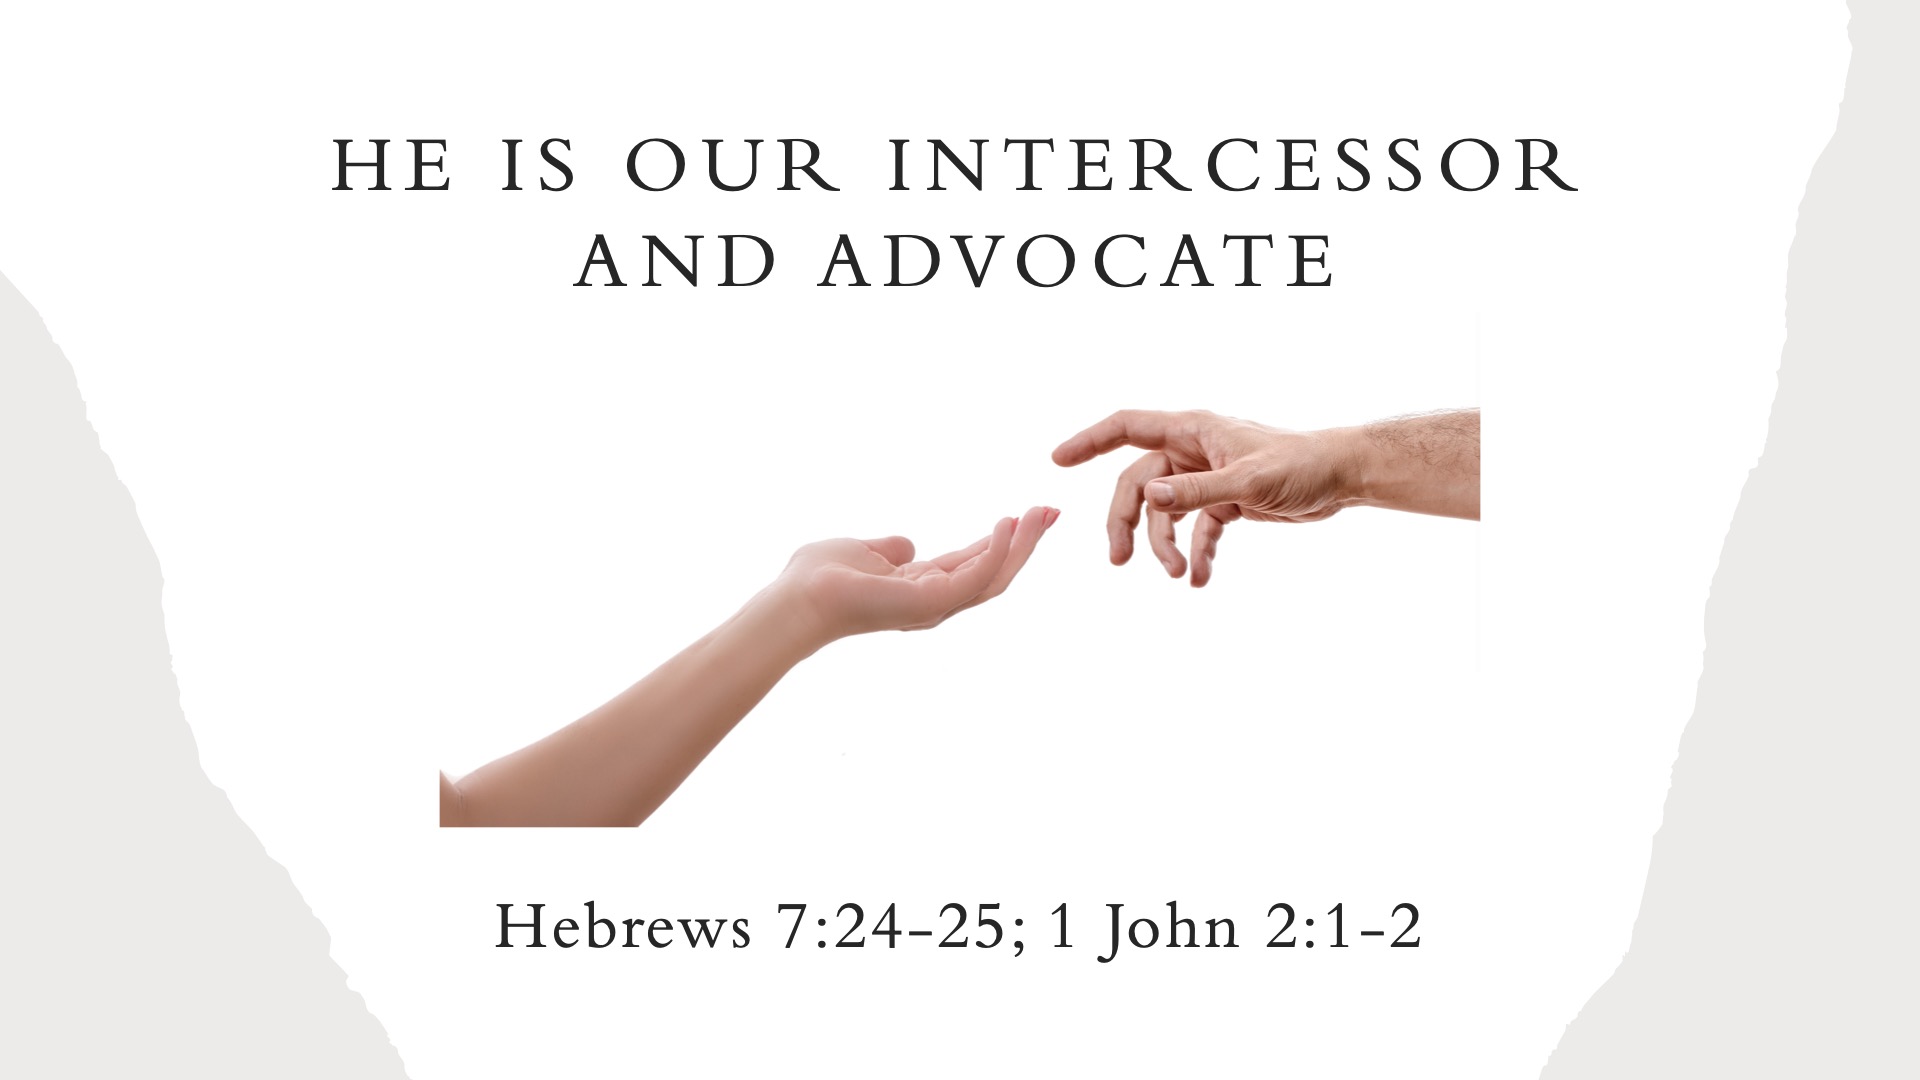 He is our intercessor and advocate